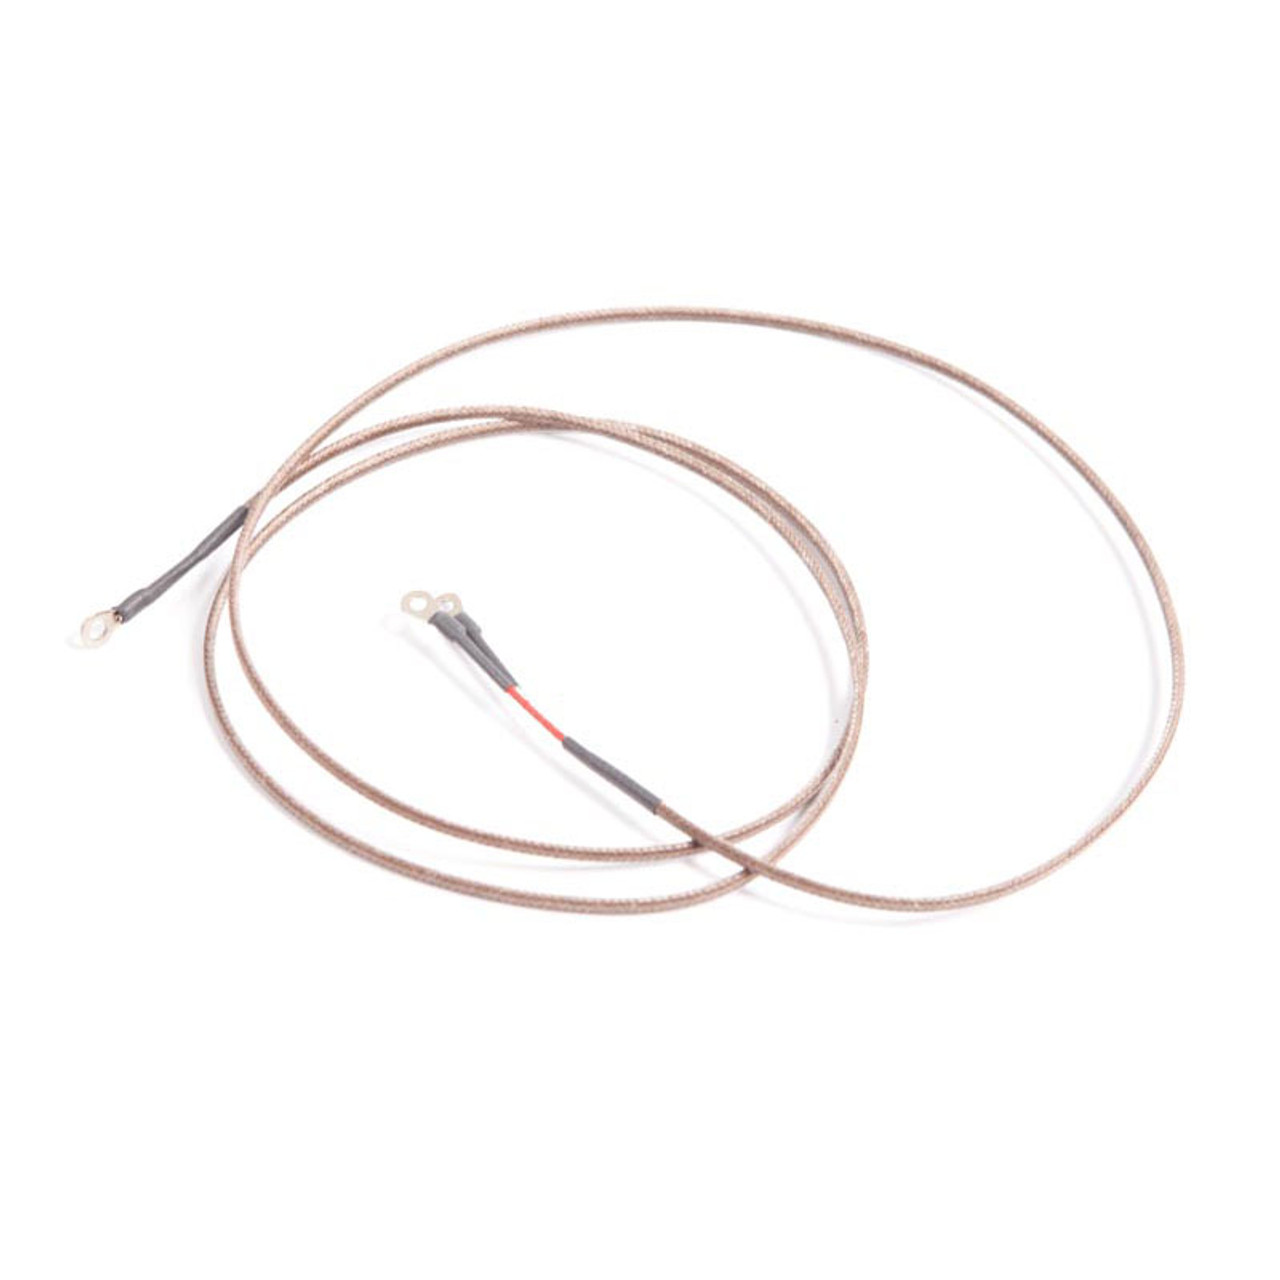 SOUTHBEND 4342-1 THERMOCOUPLE